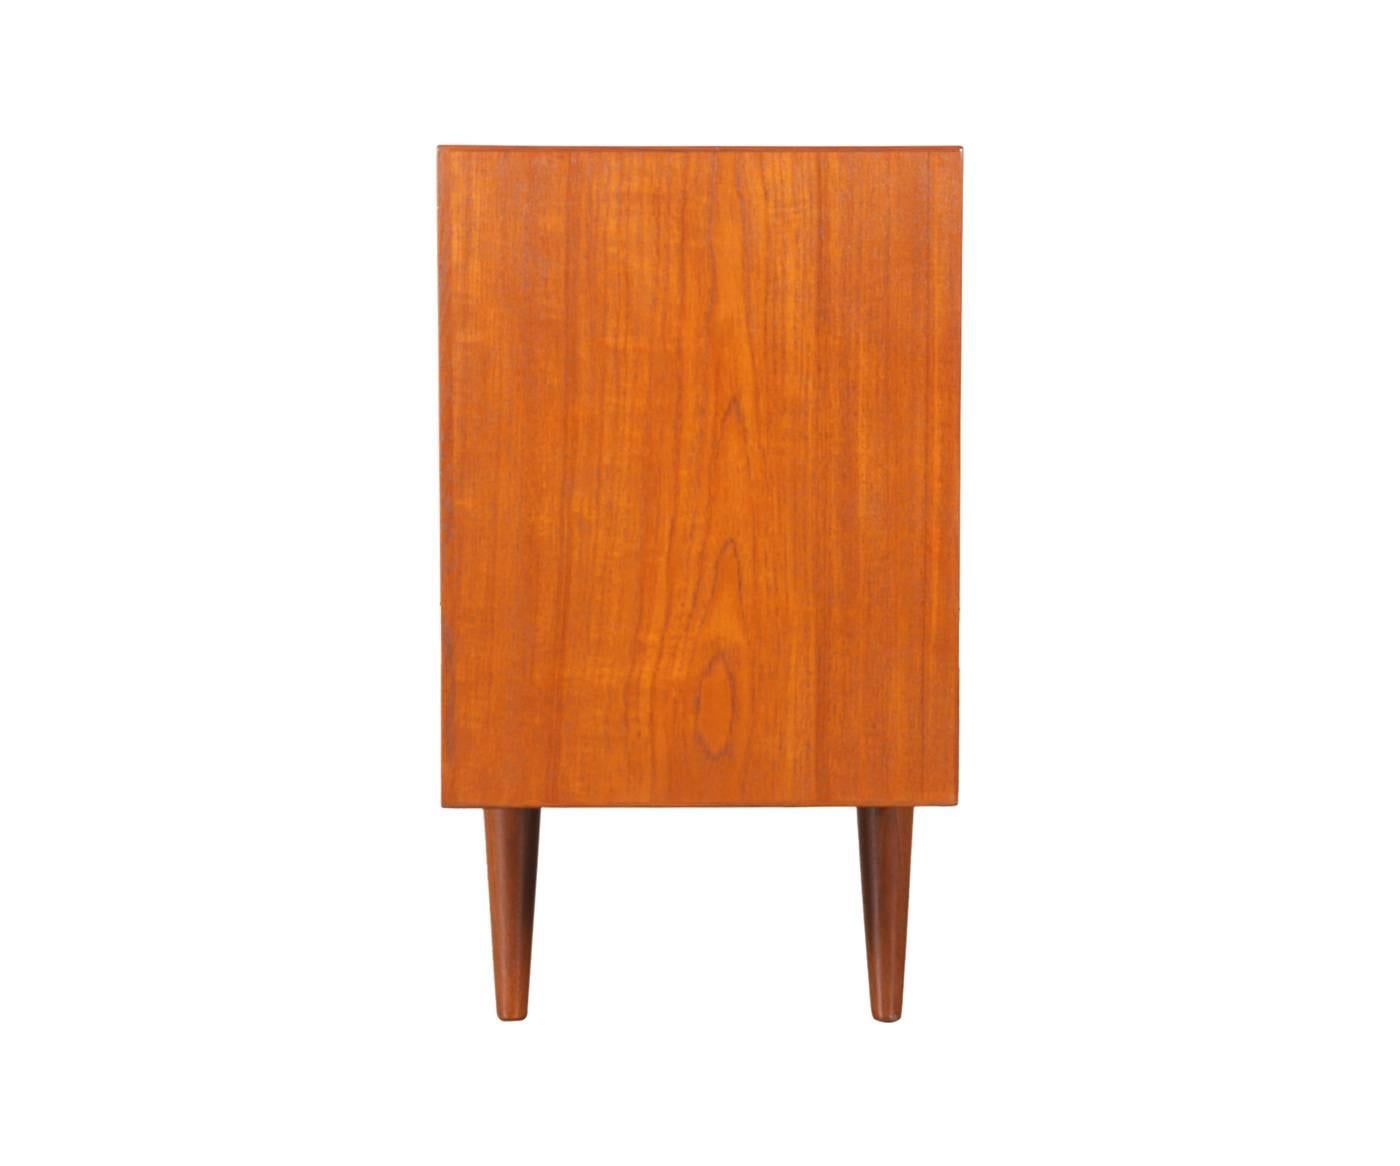 Designer: Unknown
Manufacturer: Unknown
Period/Style: Danish Modern
Country: Denmark
Date: 1960’s

Dimensions: 26.75″H x 70″L x 15″W
Materials: Teak, Glass
Condition: Excellent – Newly Refinished
Number of Items: 1
ID Number: PENDING